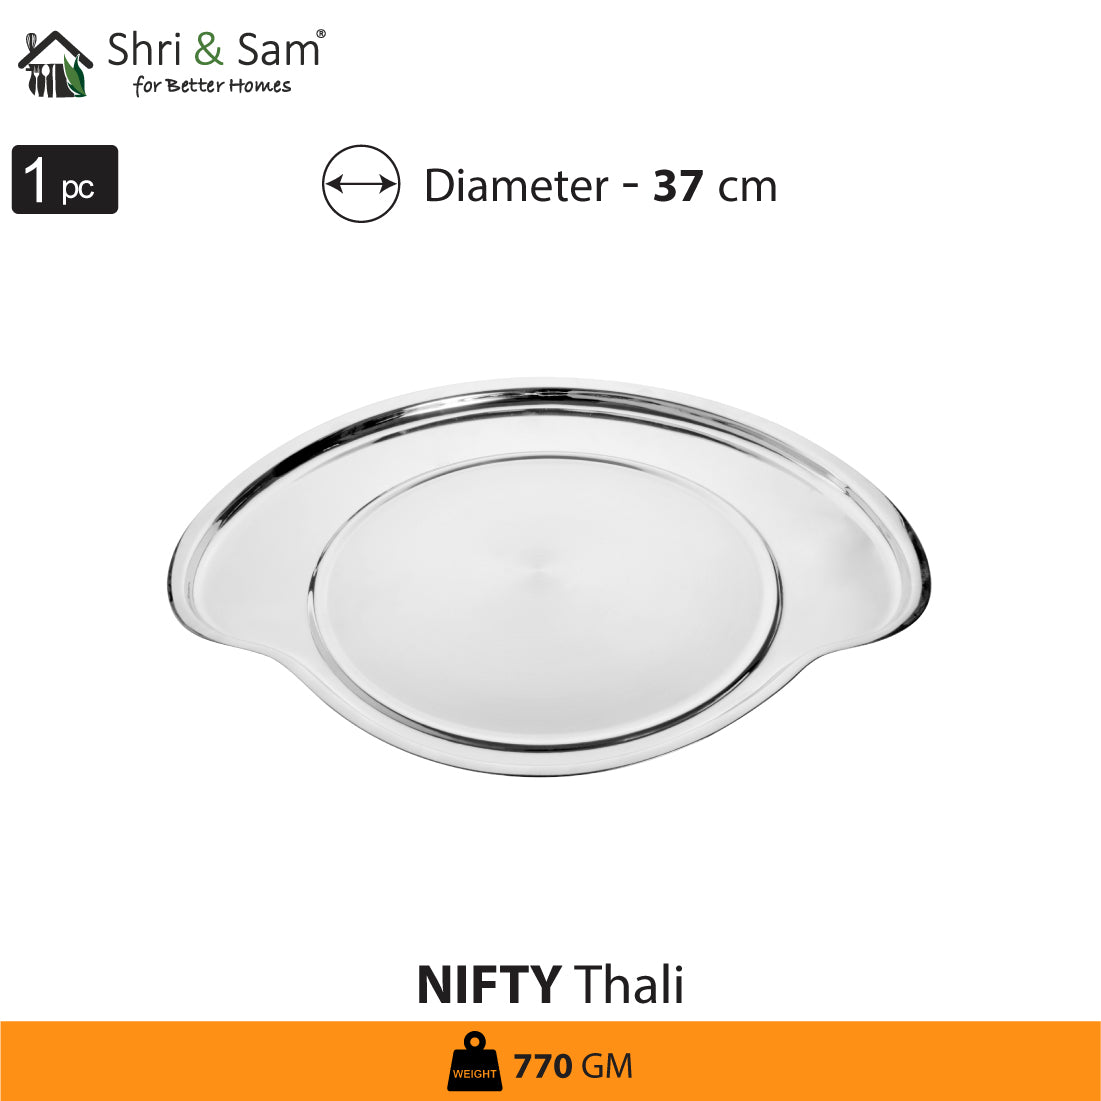 Stainless Steel Small Thali Set (1 Person) Nifty